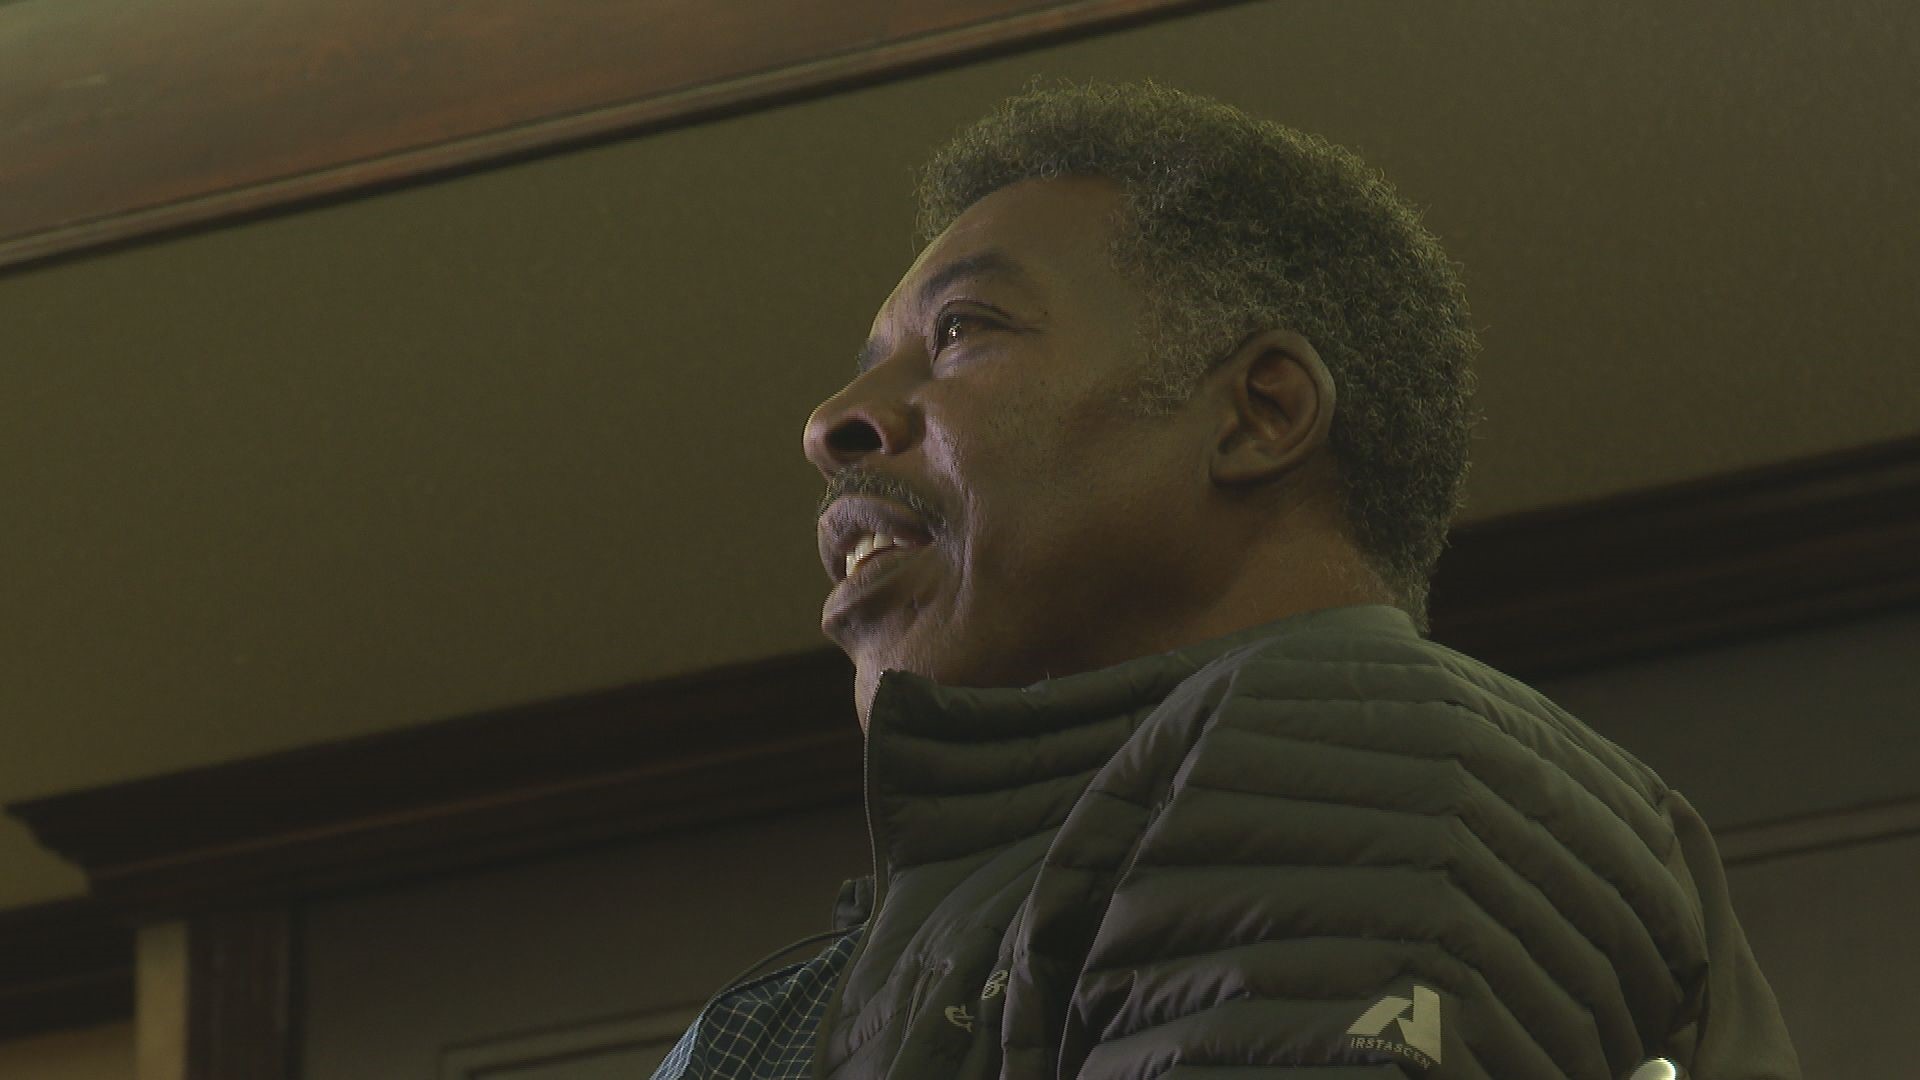 Actor Ernie Hudson who’s known for his roles in Ghostbusters, The Family Business and many more movies and TV series spoke to WFMY News 2 while making a stop in Greensboro. Hudson spoke at an event for the United Way of Greater Greensboro. He had much to say about community and about acting.